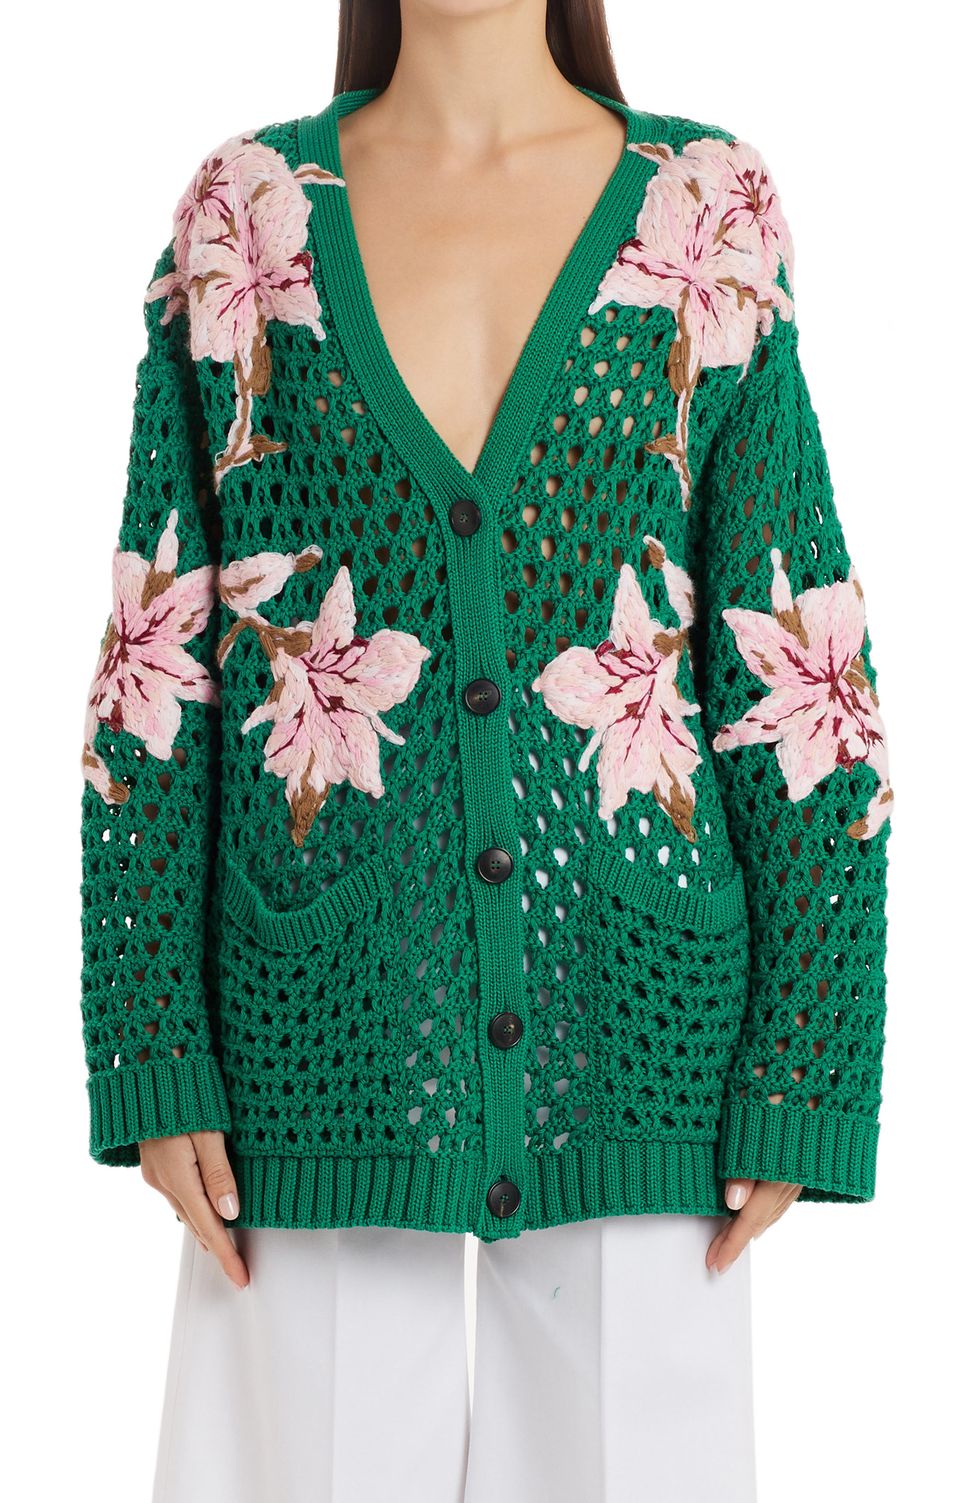 Lilum Floral Embellished Crochet Cardigan, Size Small - Green